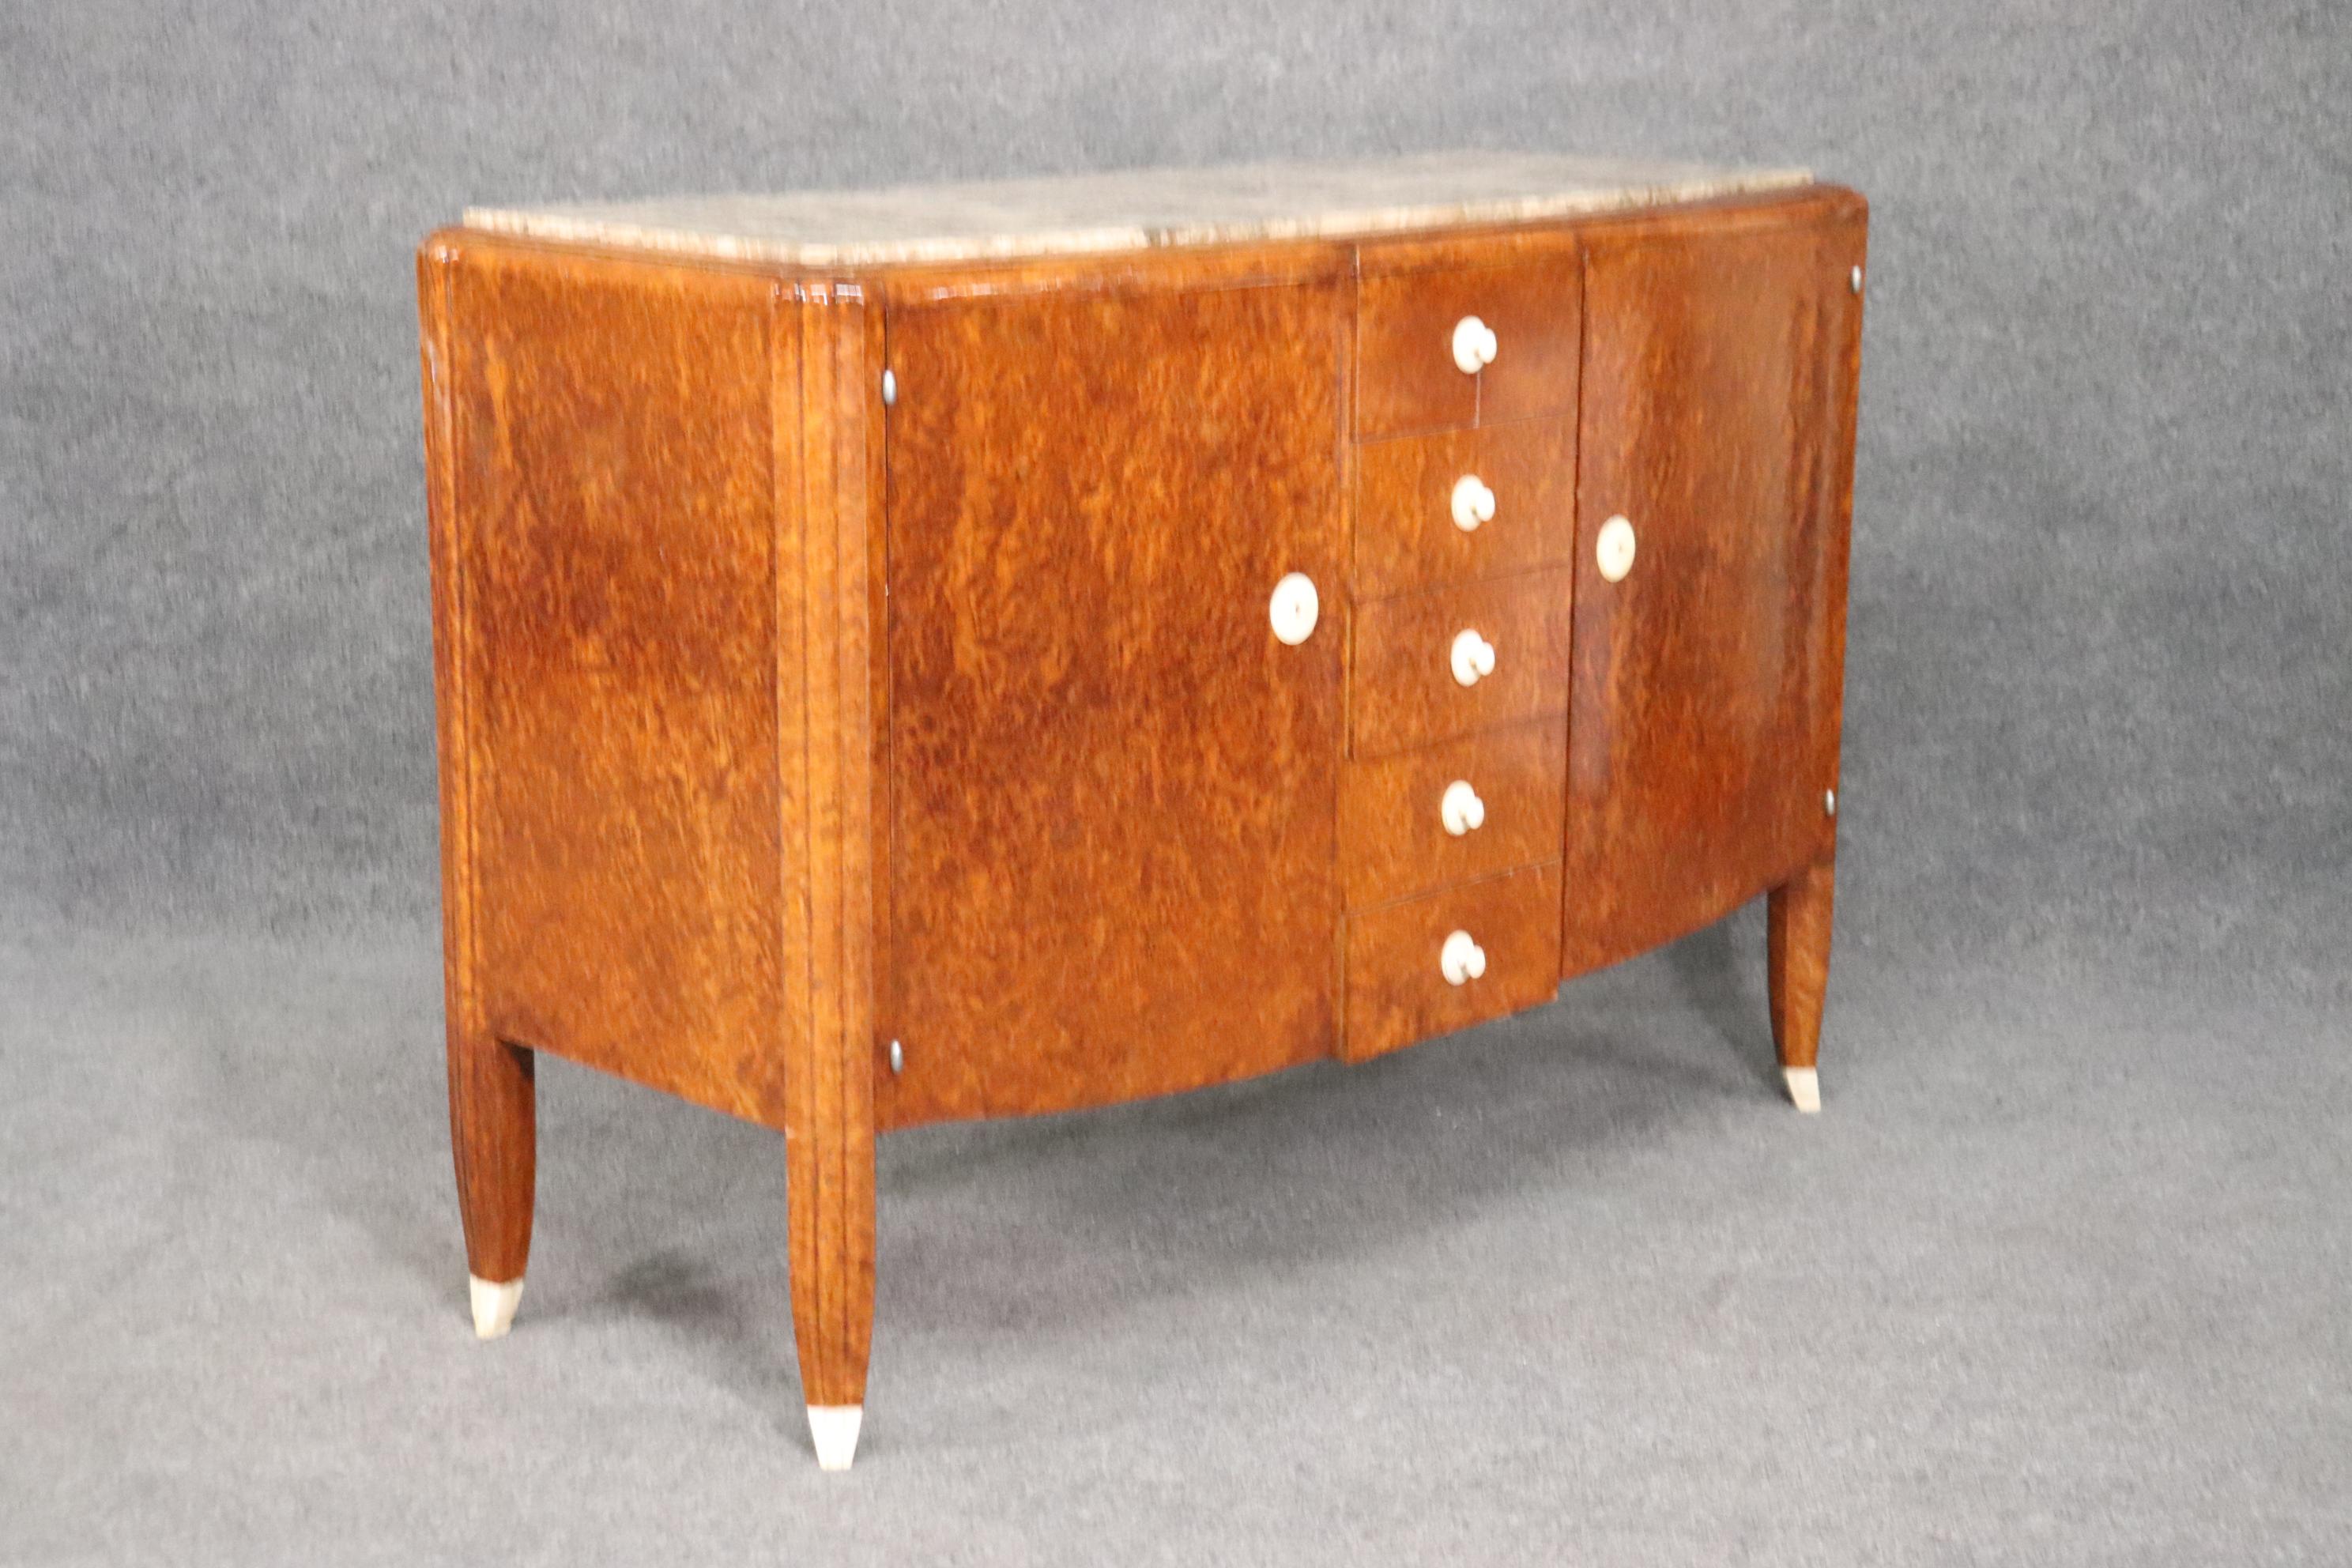 Ok, This is a rare and extremely unusual Ivory and marble burled walnut sideboard designed and made and signed by Francois Linke, one of France's most well known and best cabinet-makers. The case has been professionally French polished and is in